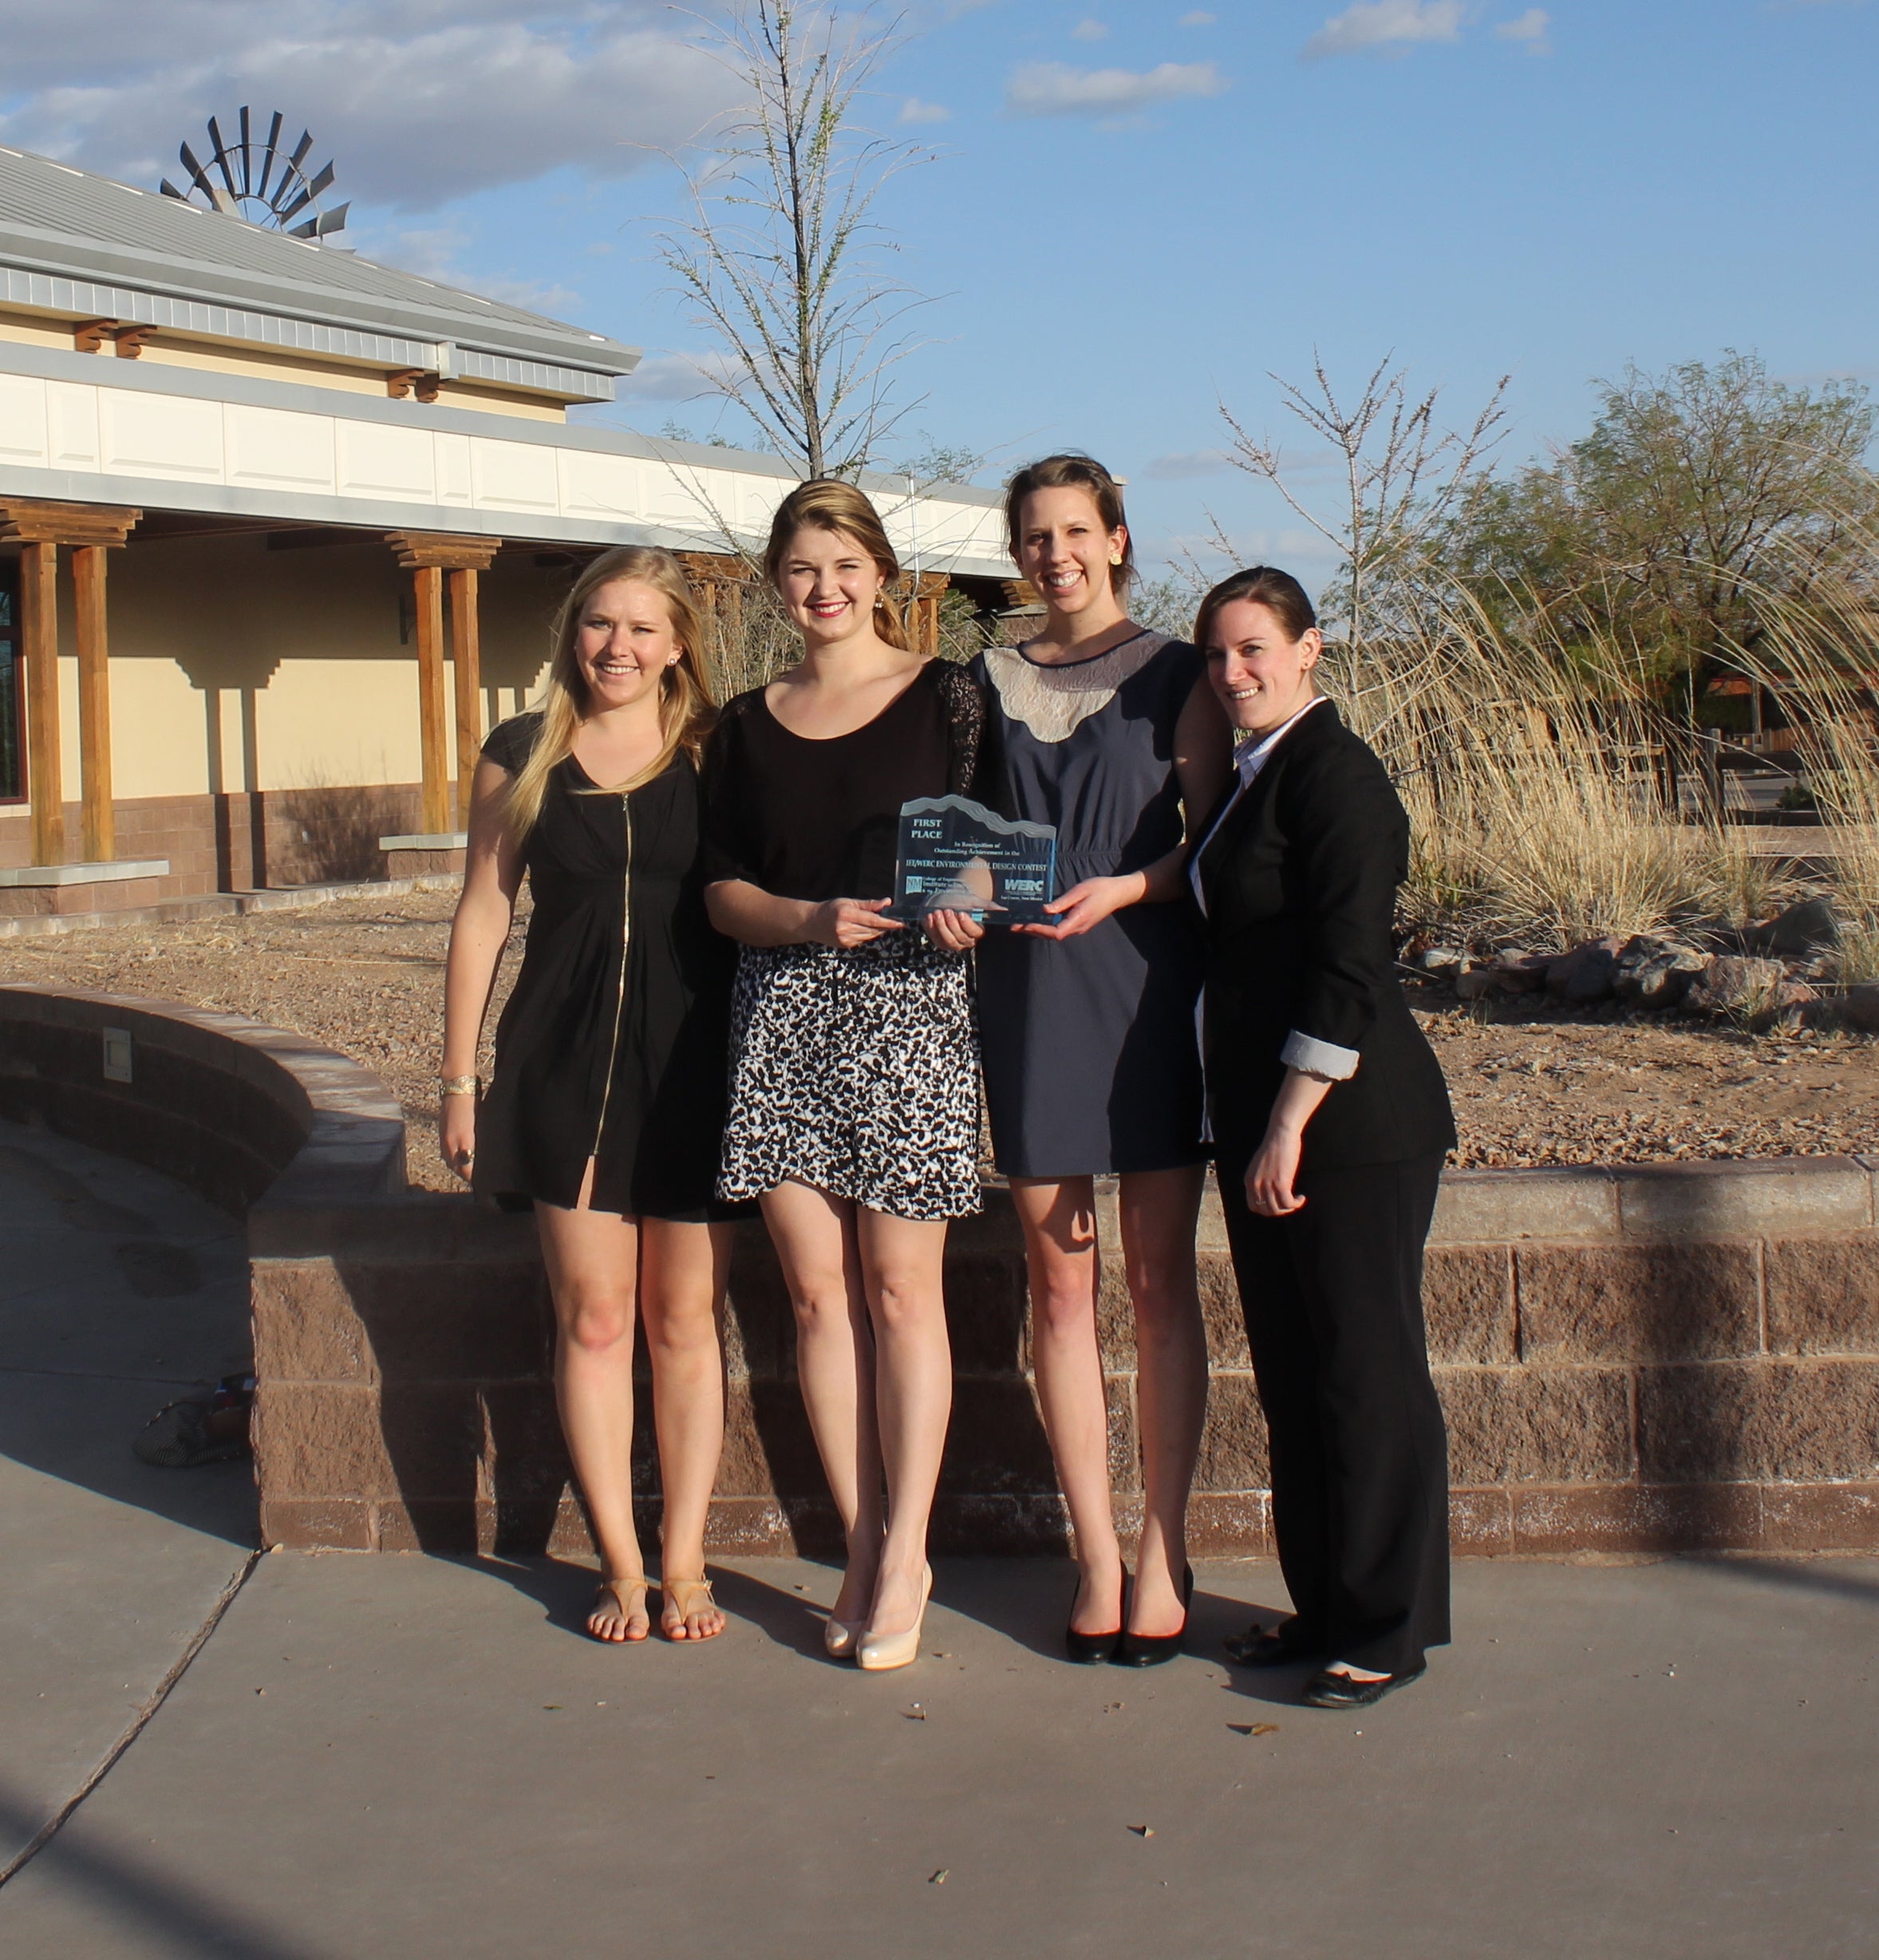 Winning student team, from left to right: Laurel Hoffarth, Victoria Chennette, Beth Hamley and Lindsay Bowman